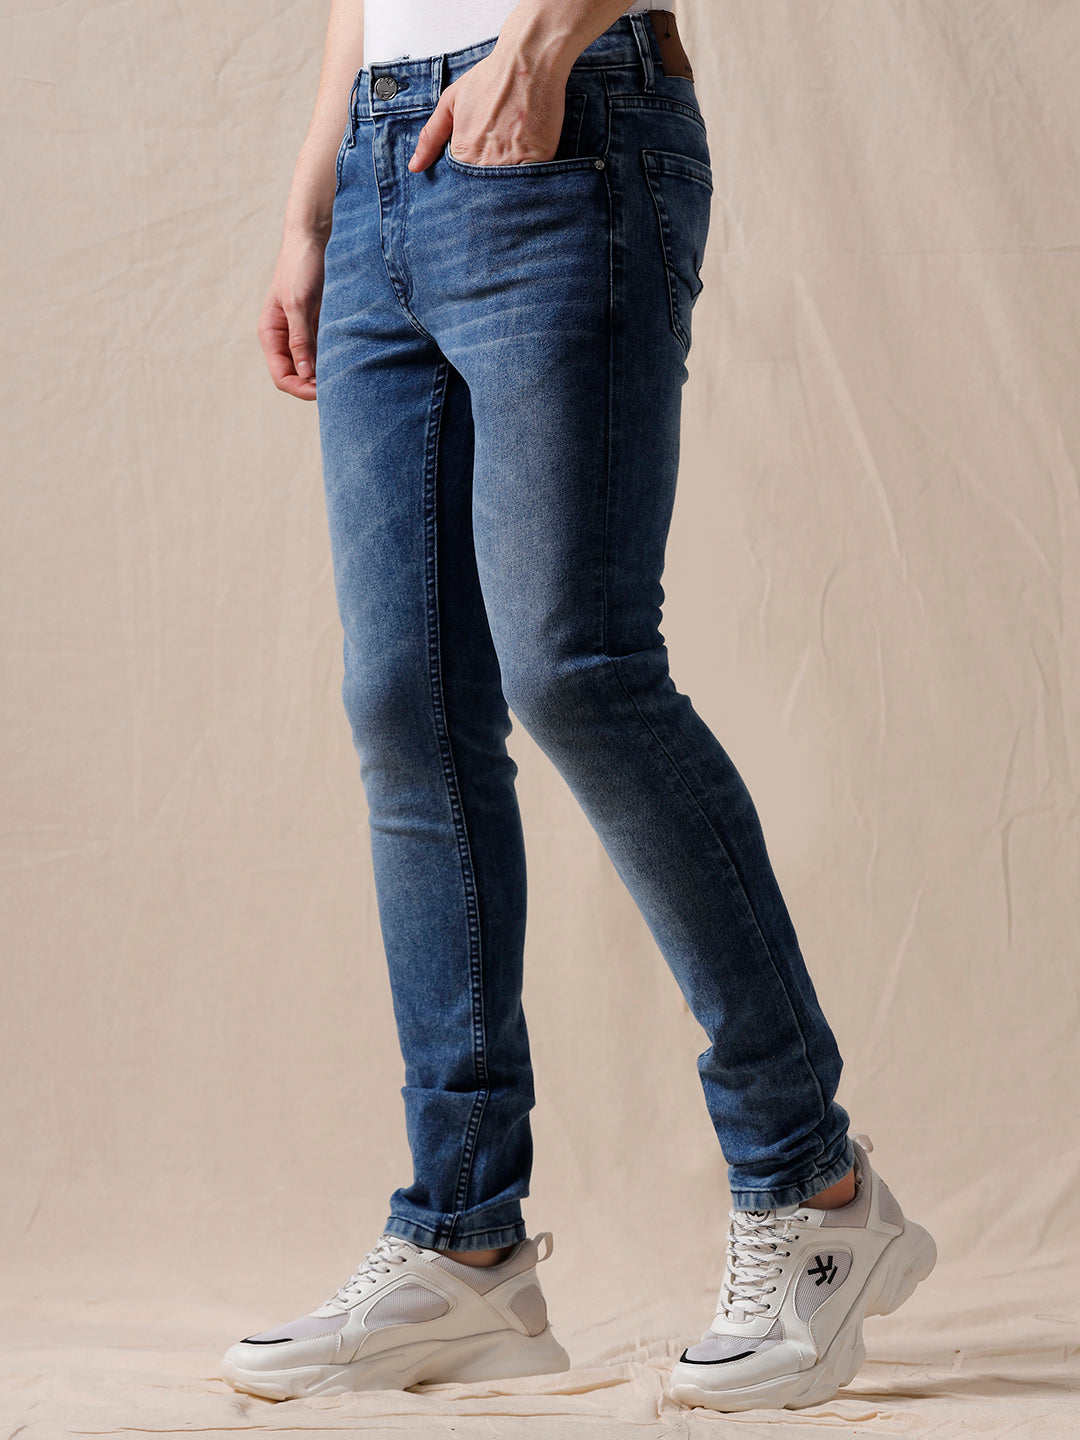 Light Tone Washed Jeans